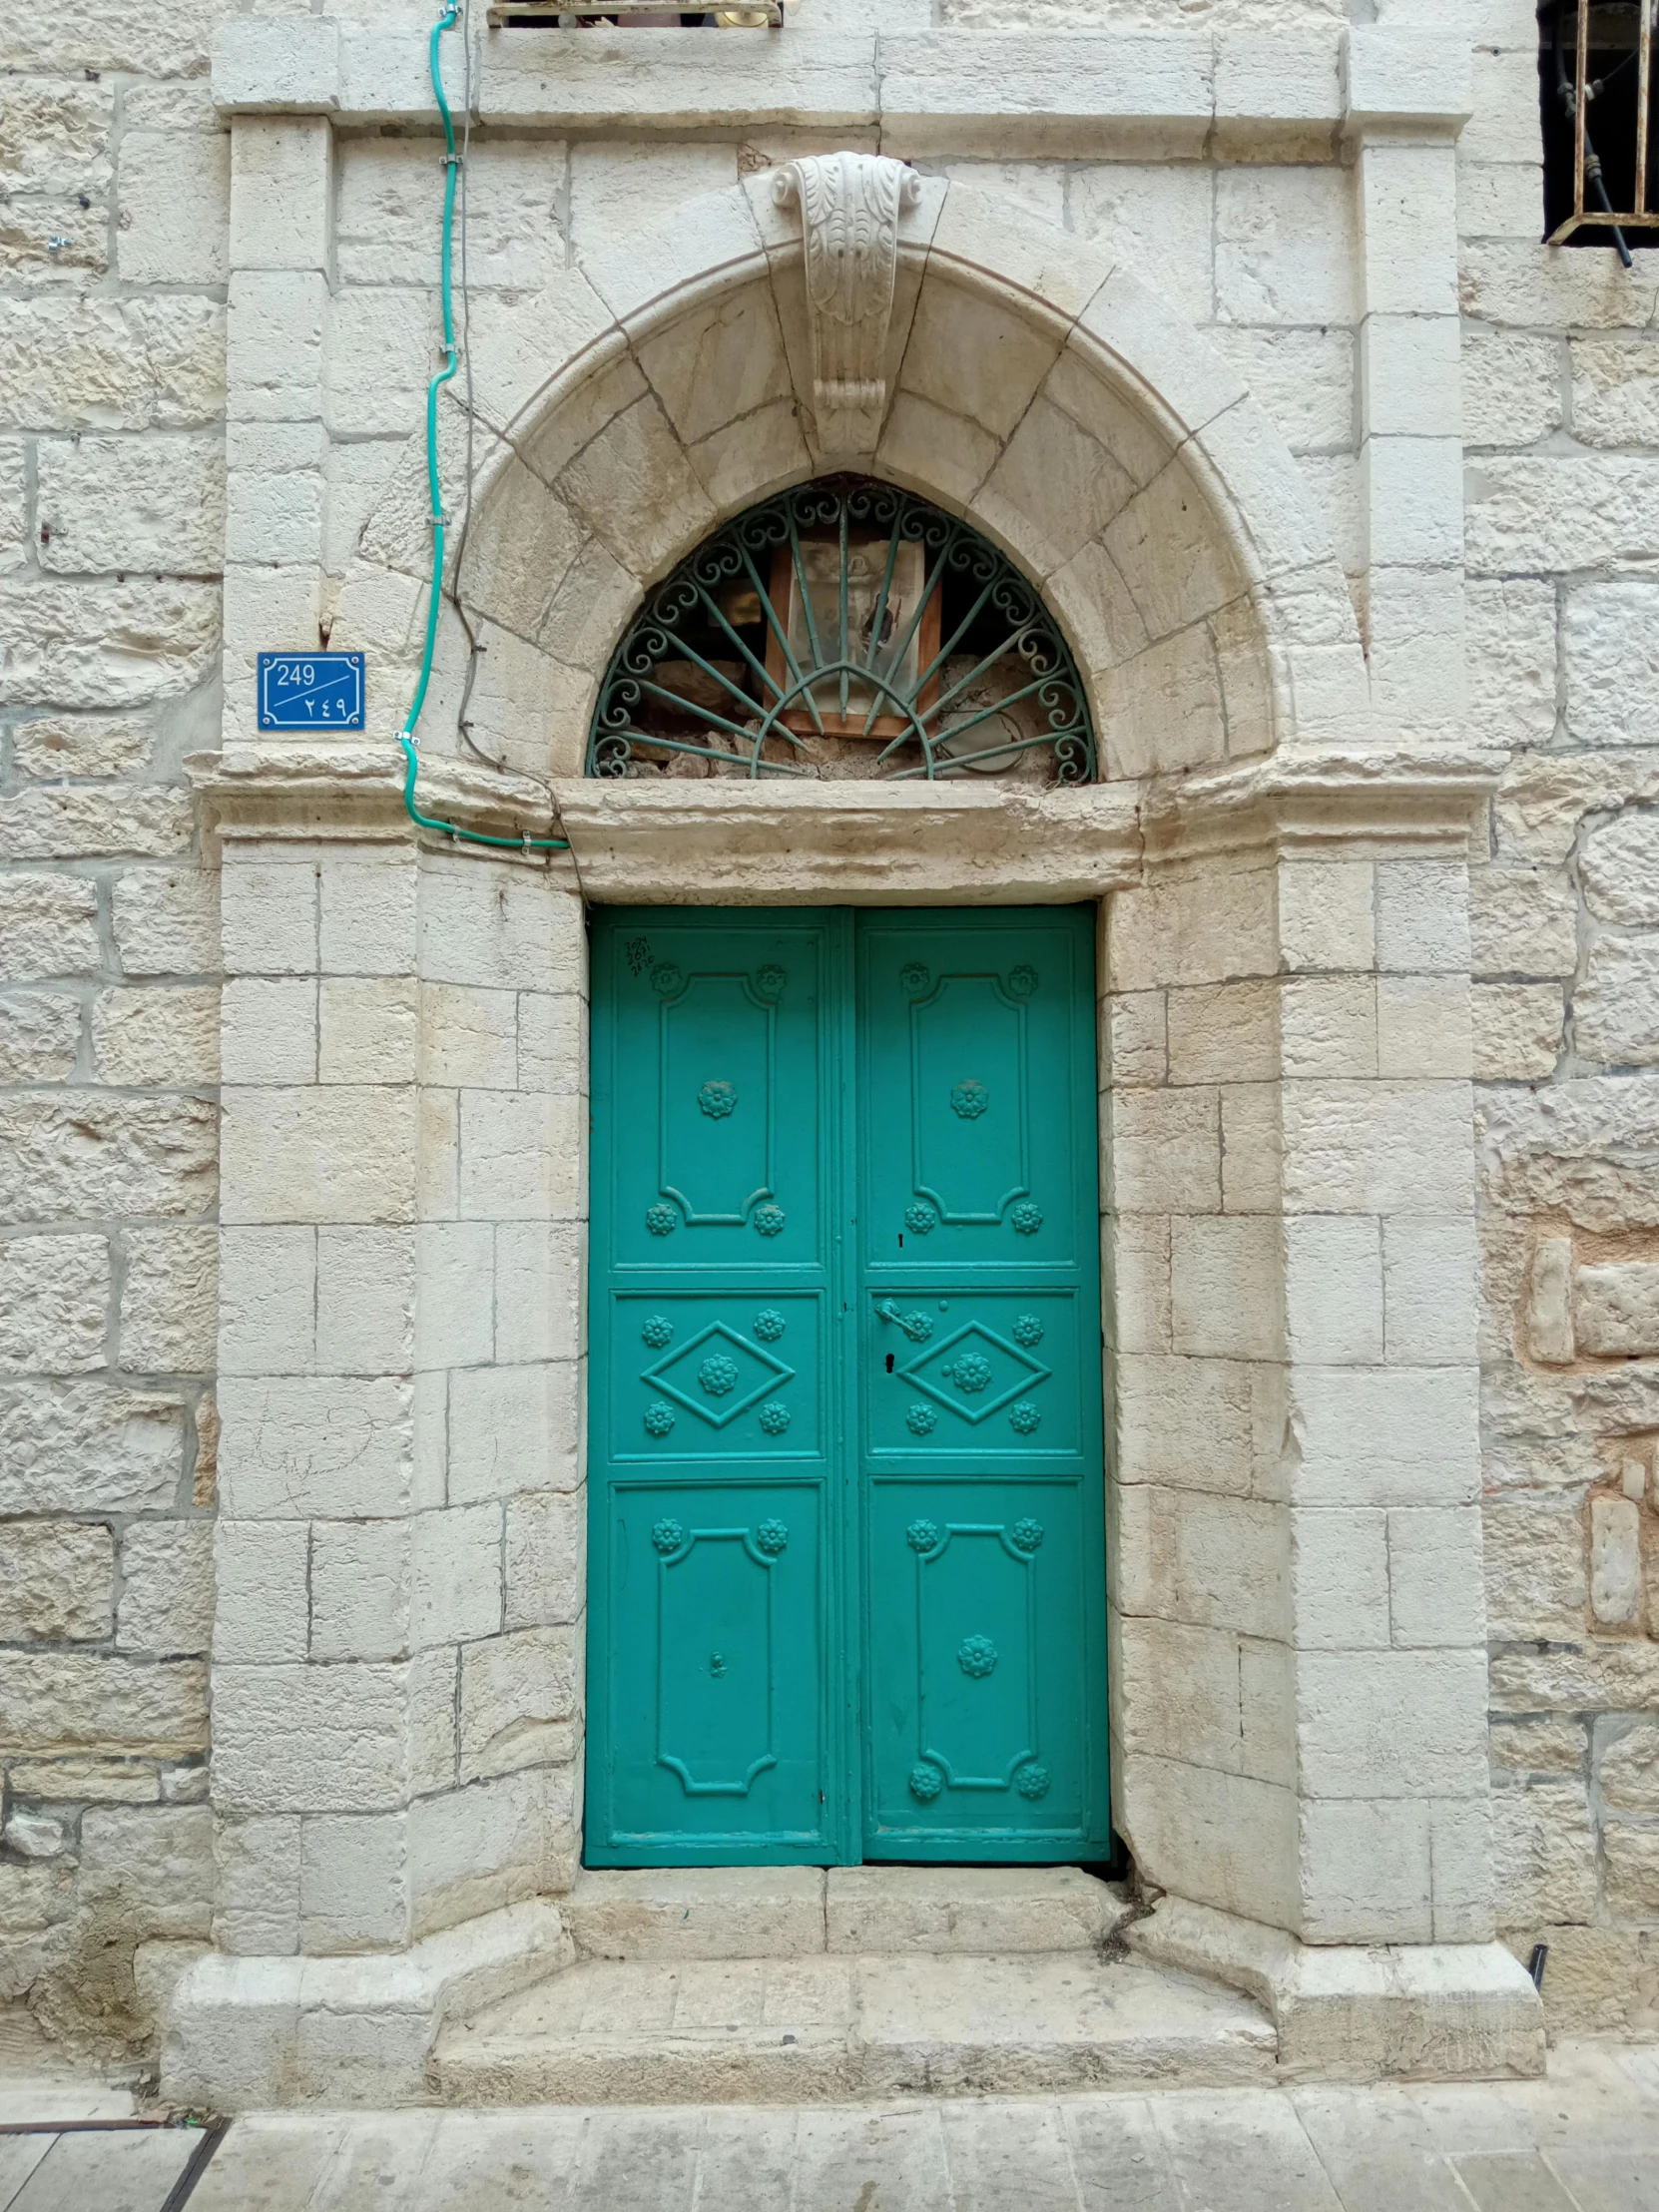 this is a turquoise green door that is above a window